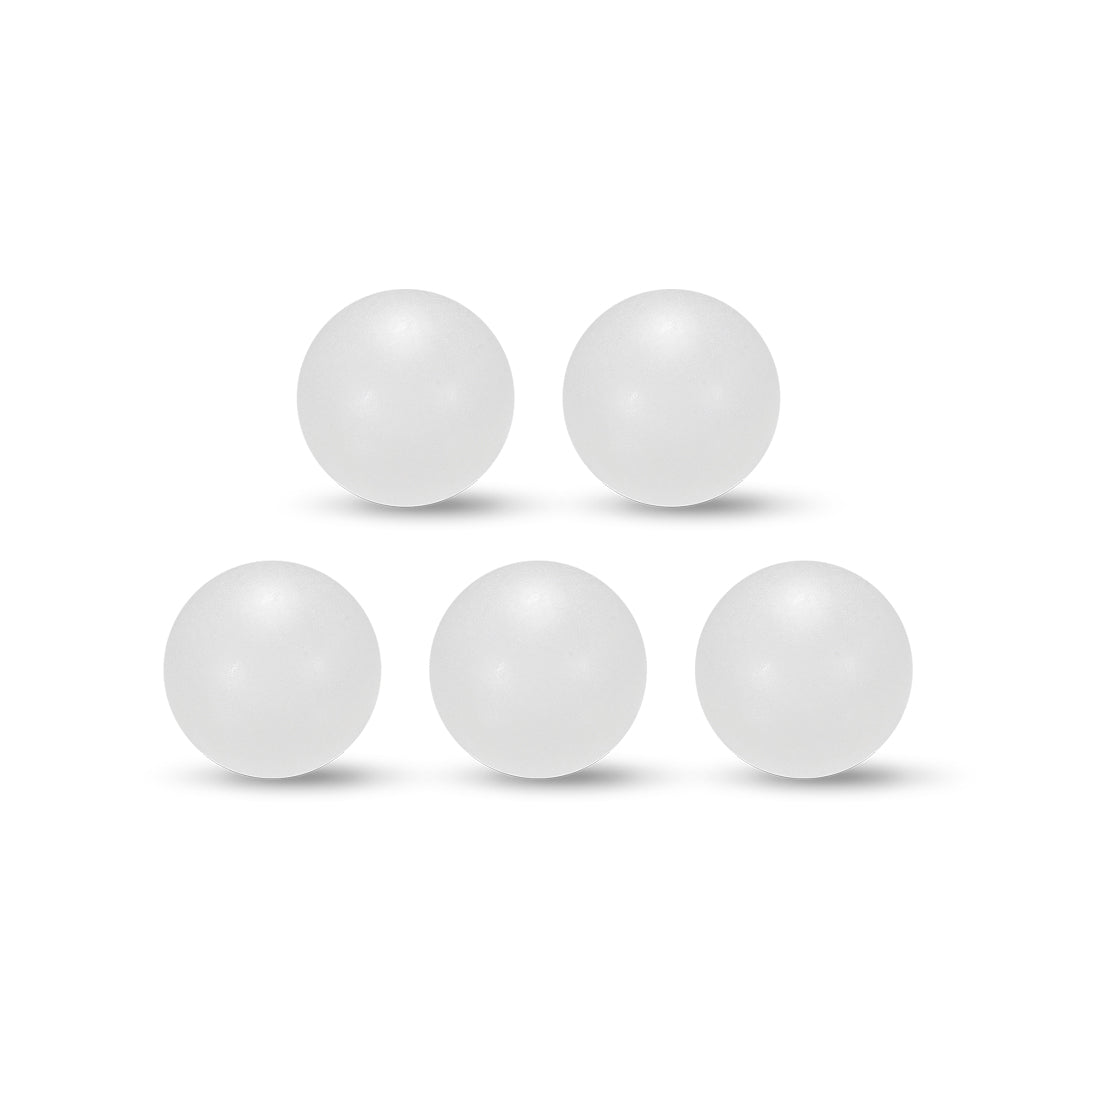 Uxcell Uxcell 1/2-inch PP Solid Plastic Balls, Precision Bearing Ball 10pcs